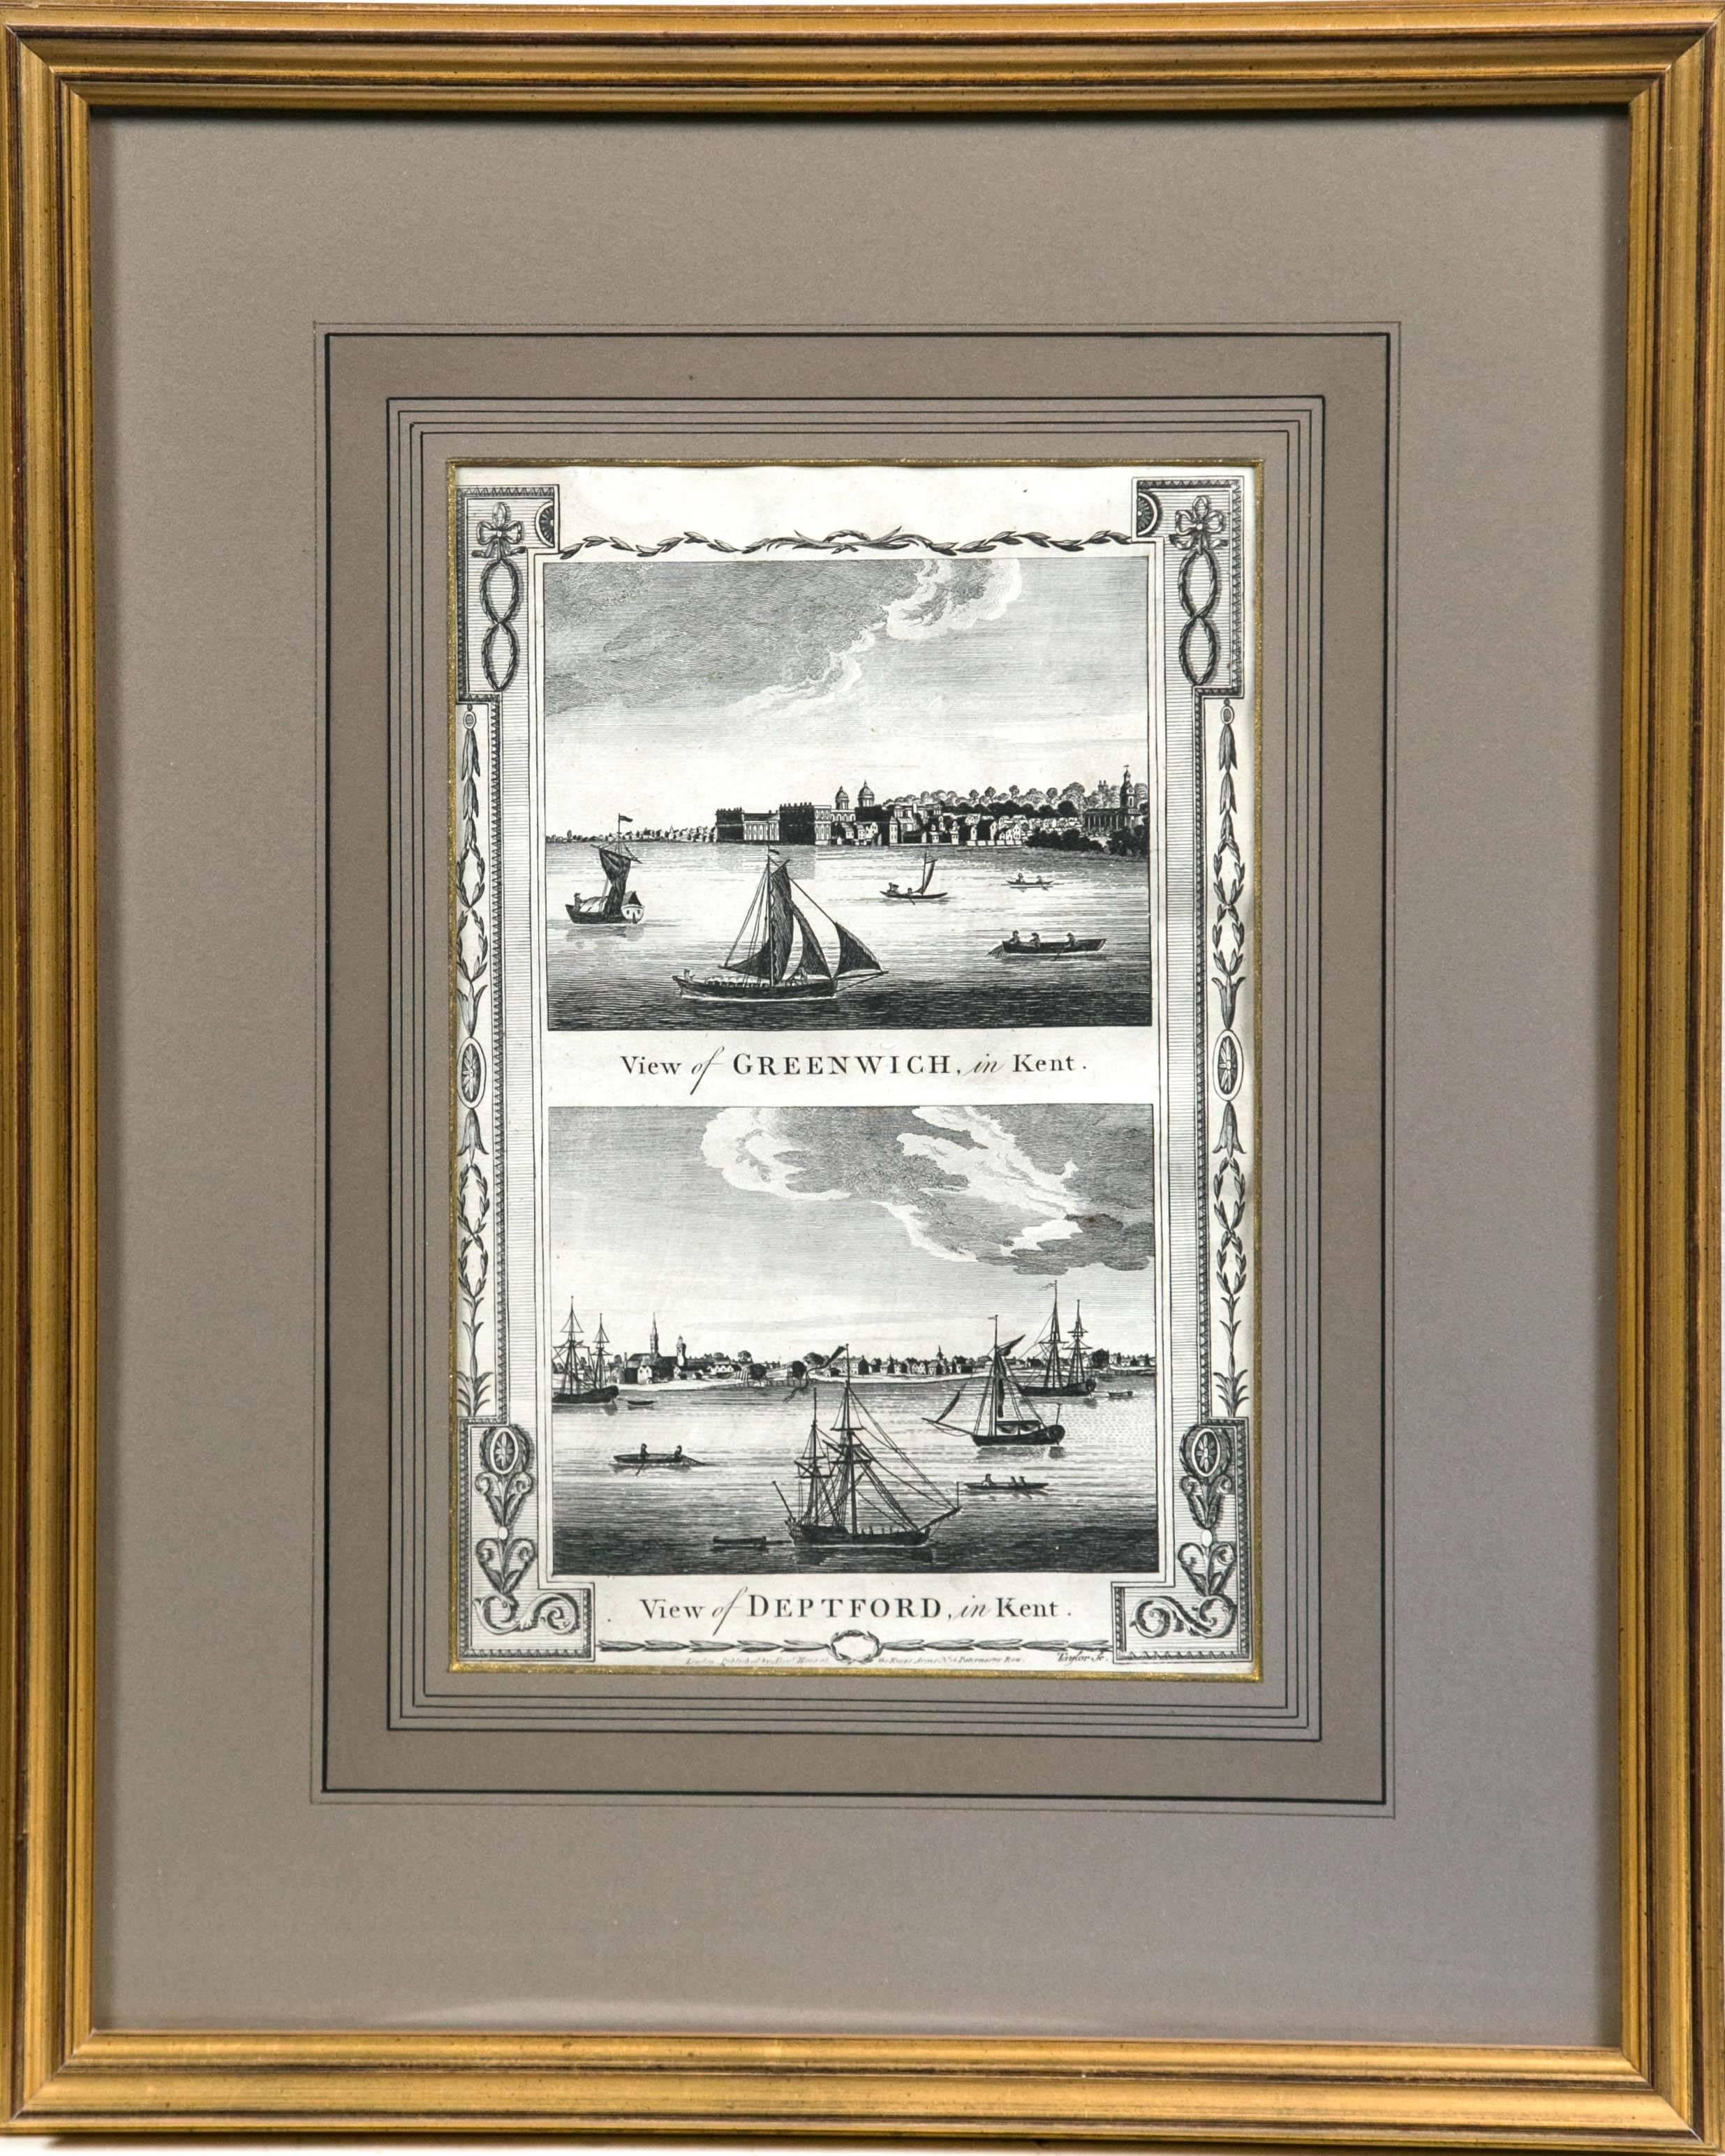 Framed print of English Harbor views, early 19th century, 